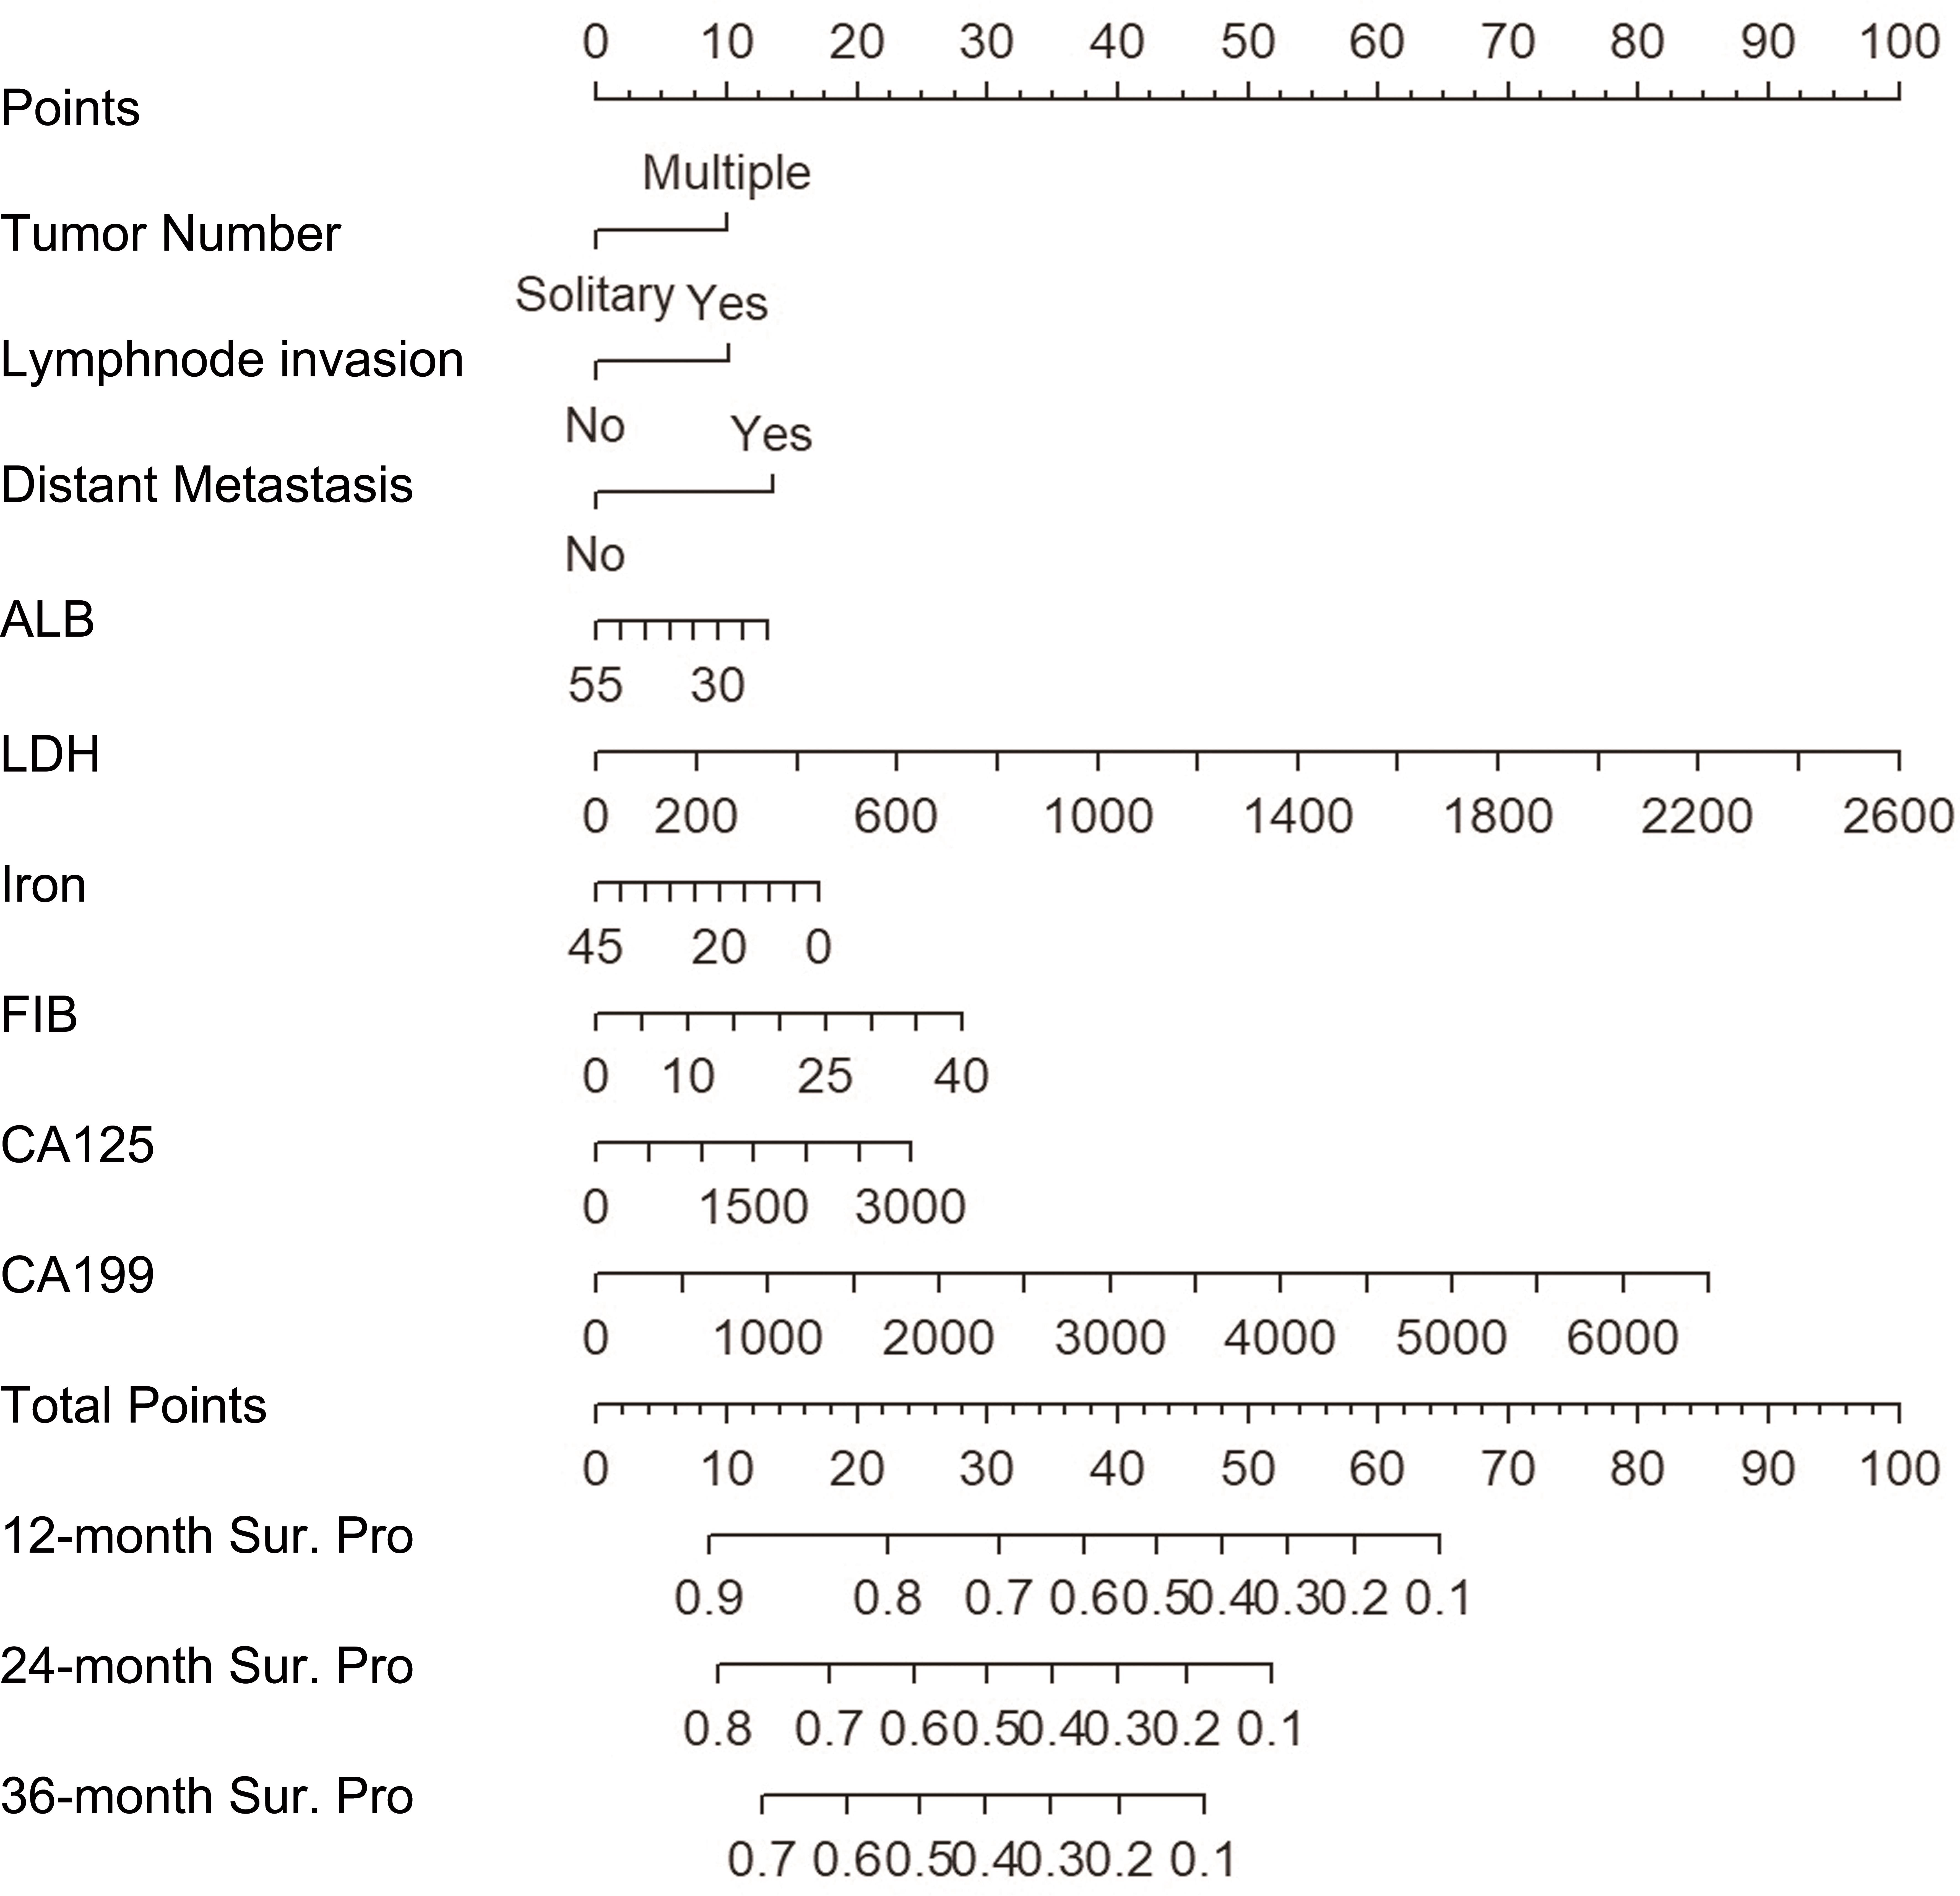 Nomogram for prediction of survival probability at 12, 24 and 36 months.